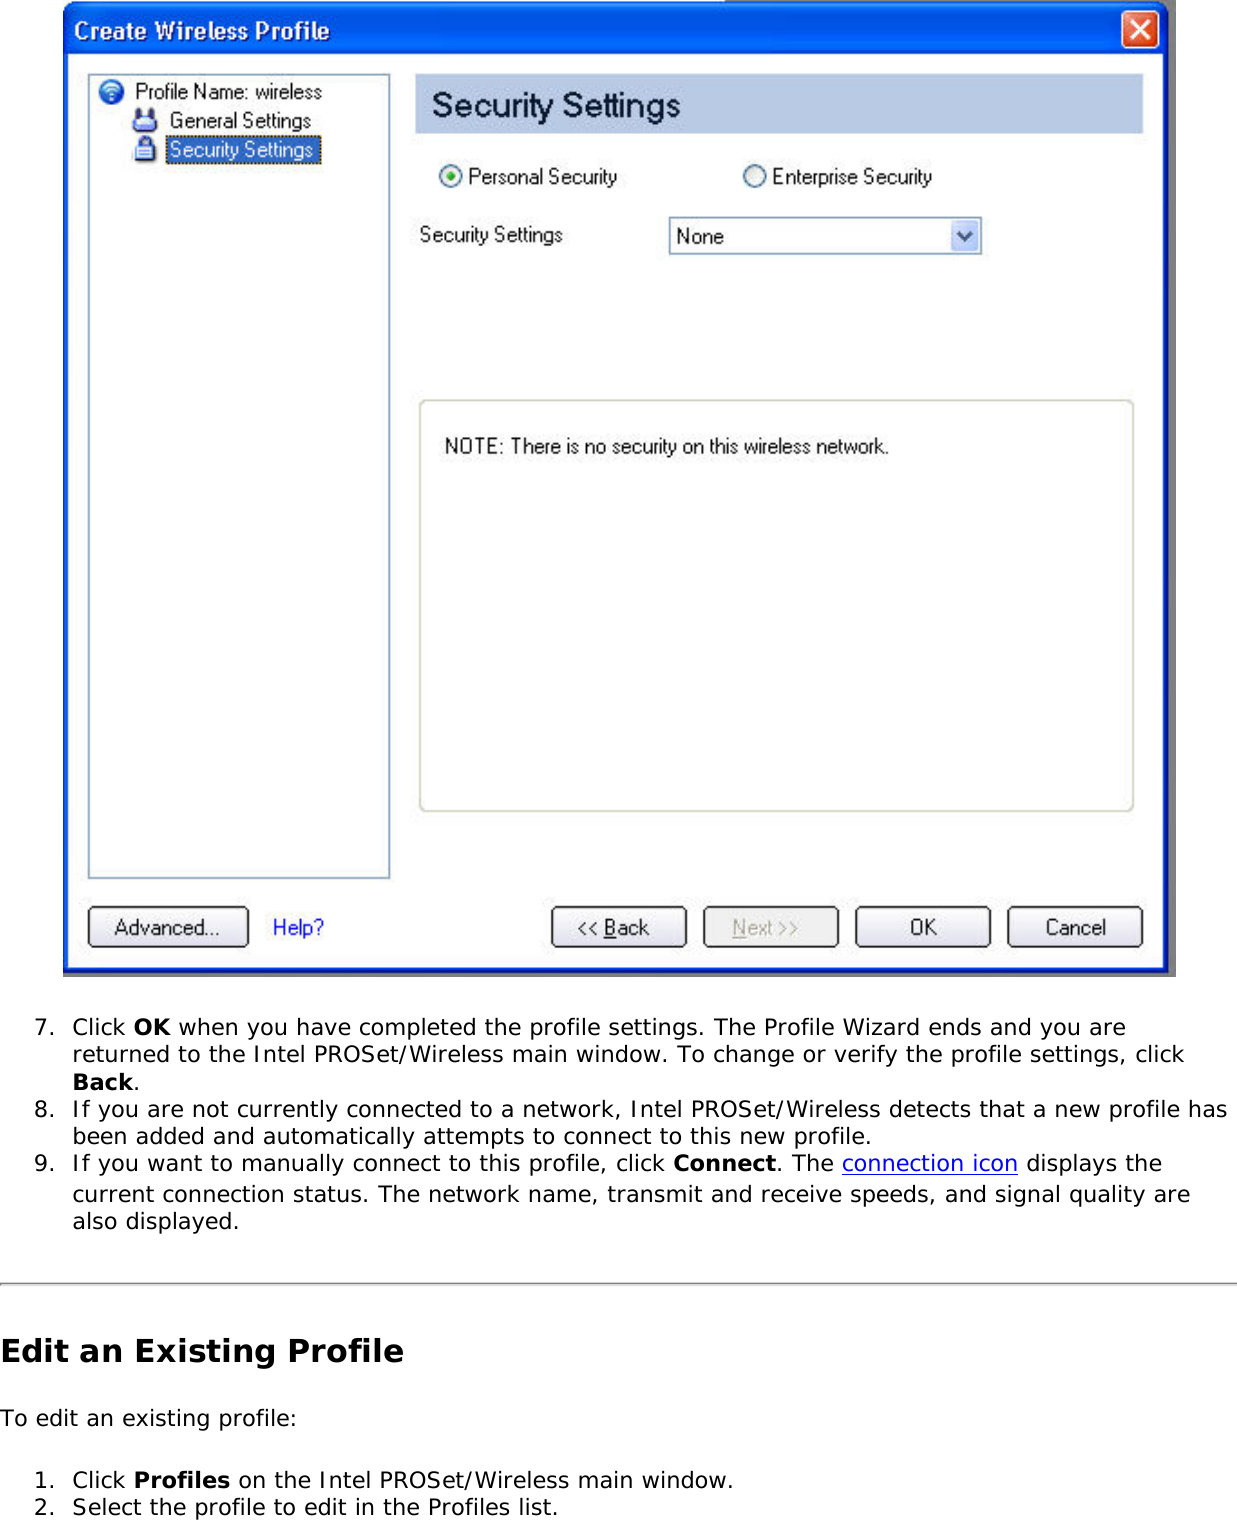  7.  Click OK when you have completed the profile settings. The Profile Wizard ends and you are returned to the Intel PROSet/Wireless main window. To change or verify the profile settings, click Back. 8.  If you are not currently connected to a network, Intel PROSet/Wireless detects that a new profile has been added and automatically attempts to connect to this new profile. 9.  If you want to manually connect to this profile, click Connect. The connection icon displays the current connection status. The network name, transmit and receive speeds, and signal quality are also displayed. Edit an Existing ProfileTo edit an existing profile: 1.  Click Profiles on the Intel PROSet/Wireless main window.2.  Select the profile to edit in the Profiles list. 